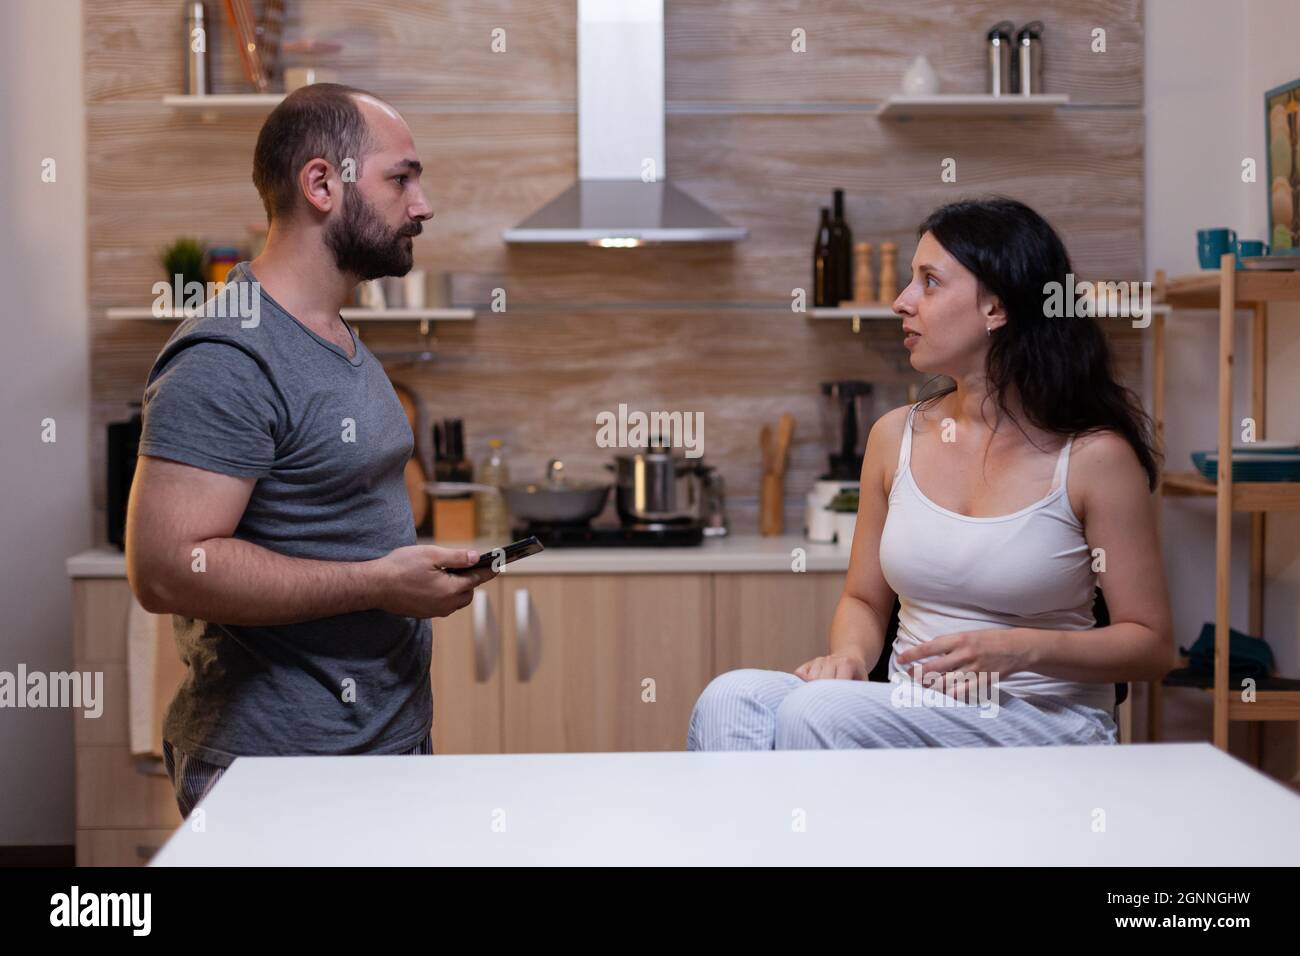 Upset wife caught cheating by jealous husband holding smartphone for text messages proof. Angry man fighting with woman about infidelity and secret boyfriend. Relationship crisis Stock Photo